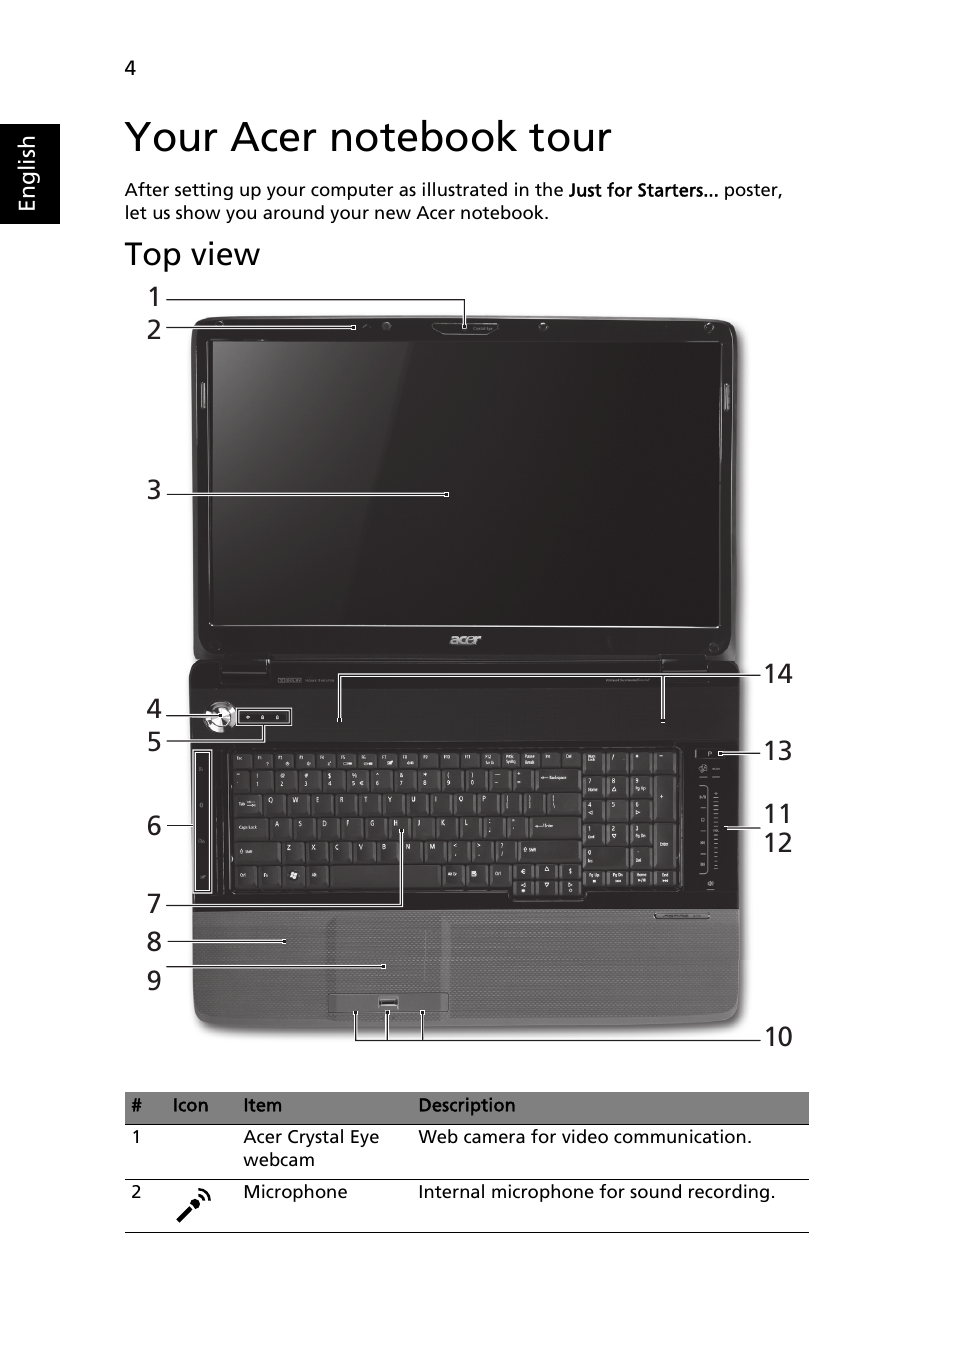 Your acer notebook tour, Top view | Acer Aspire 8735 User Manual | Page 4 /  13